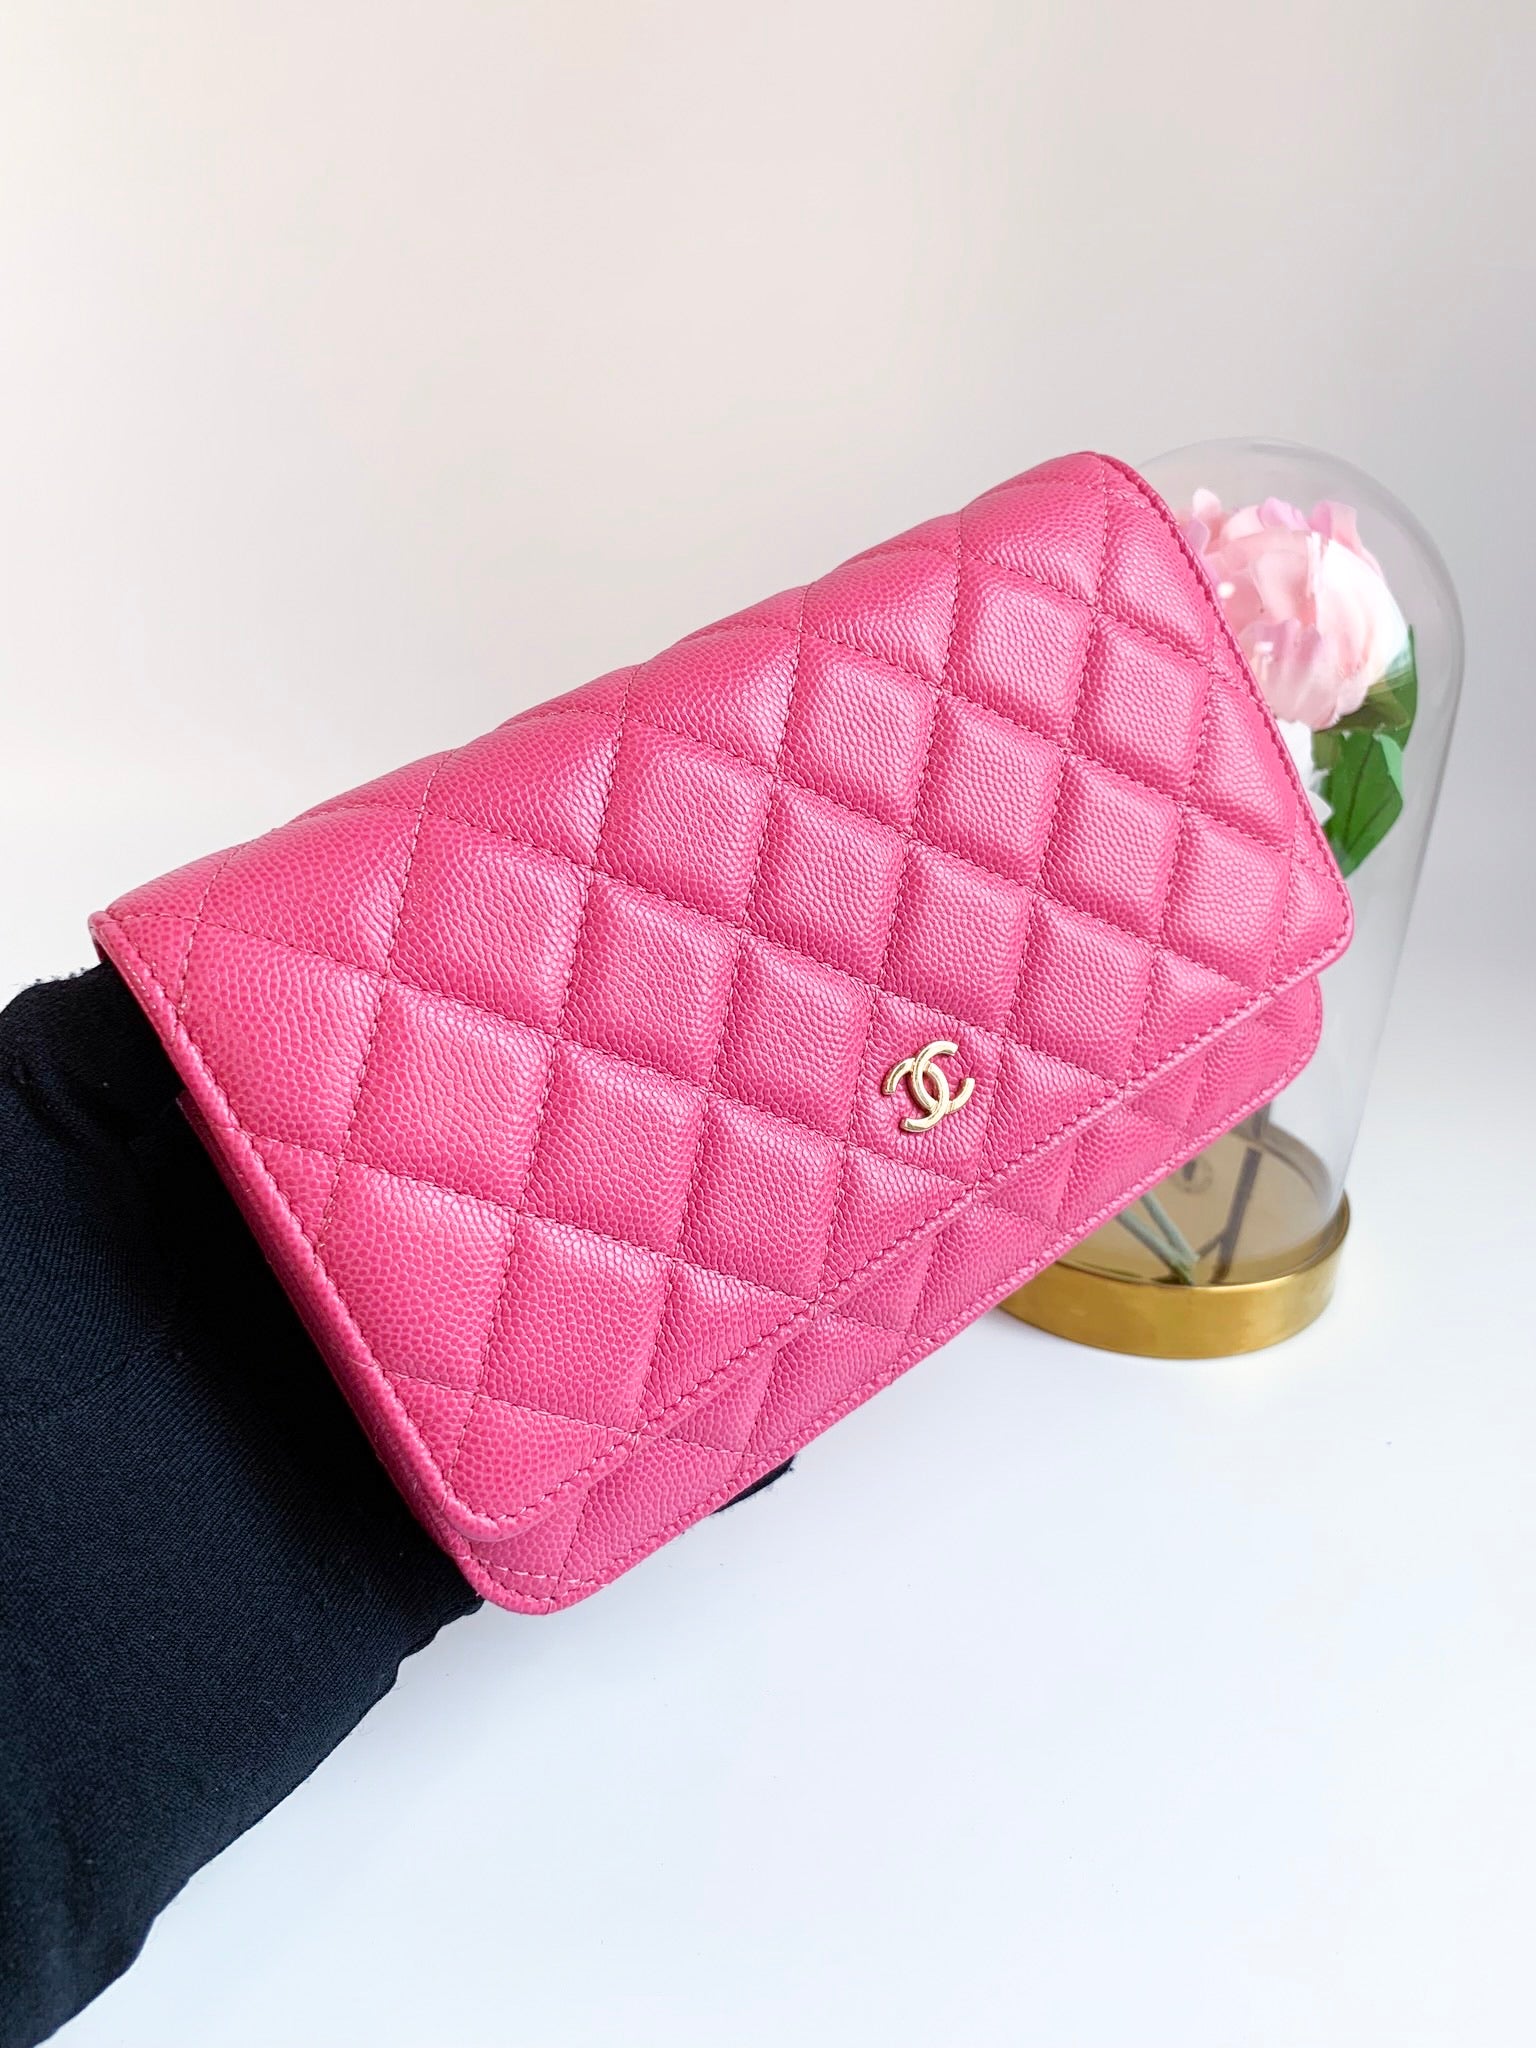 Chanel Light Pink Caviar Leather CC Bifold Card Case Chanel